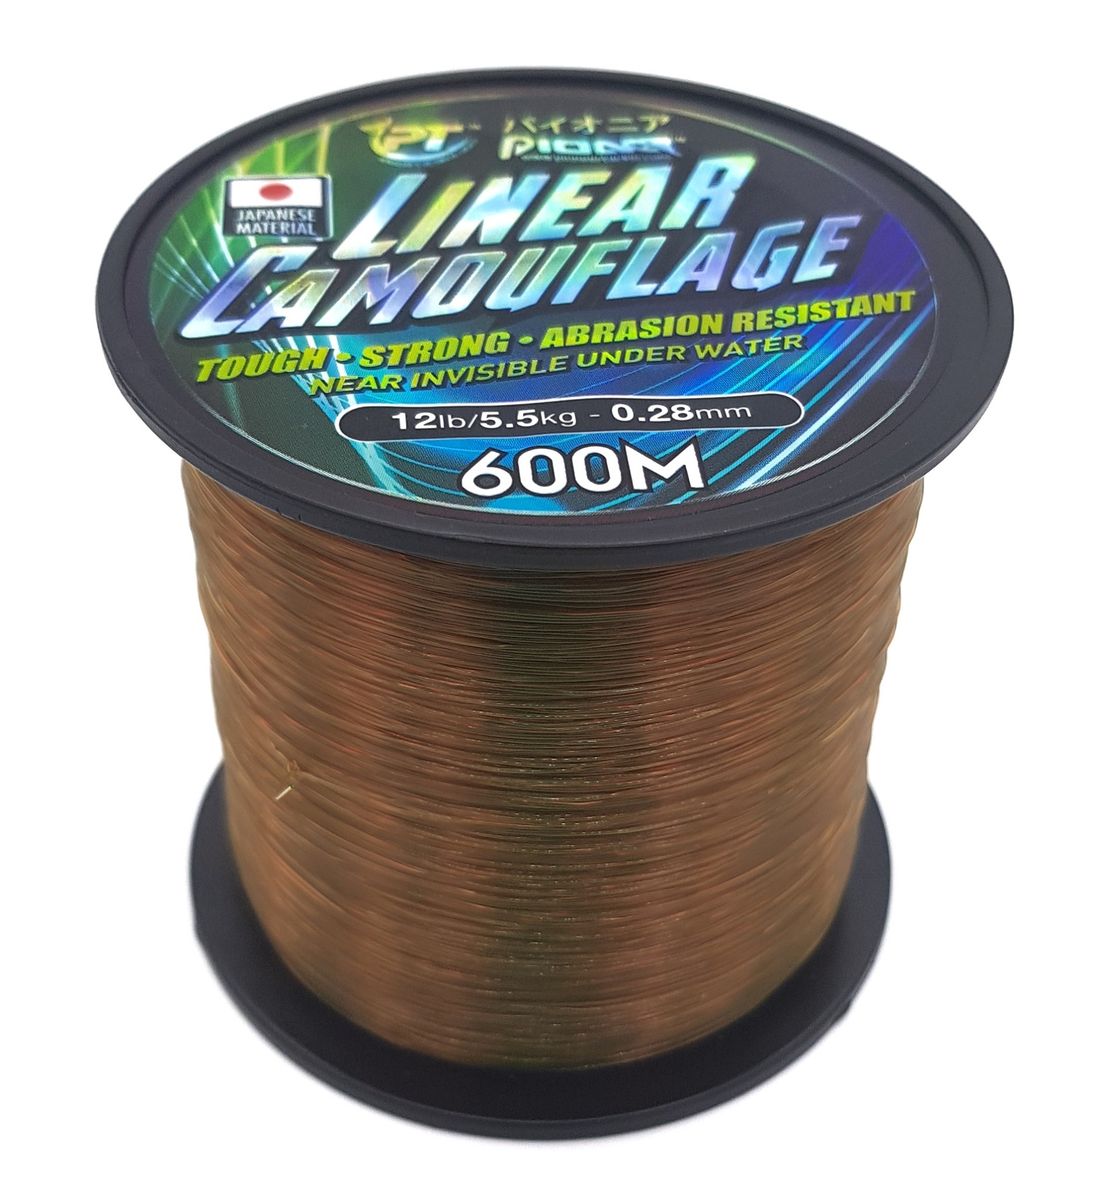 Pioneer Linear Camouflage 12lb/5,5kg Fishing Line | Shop Today. Get it ...